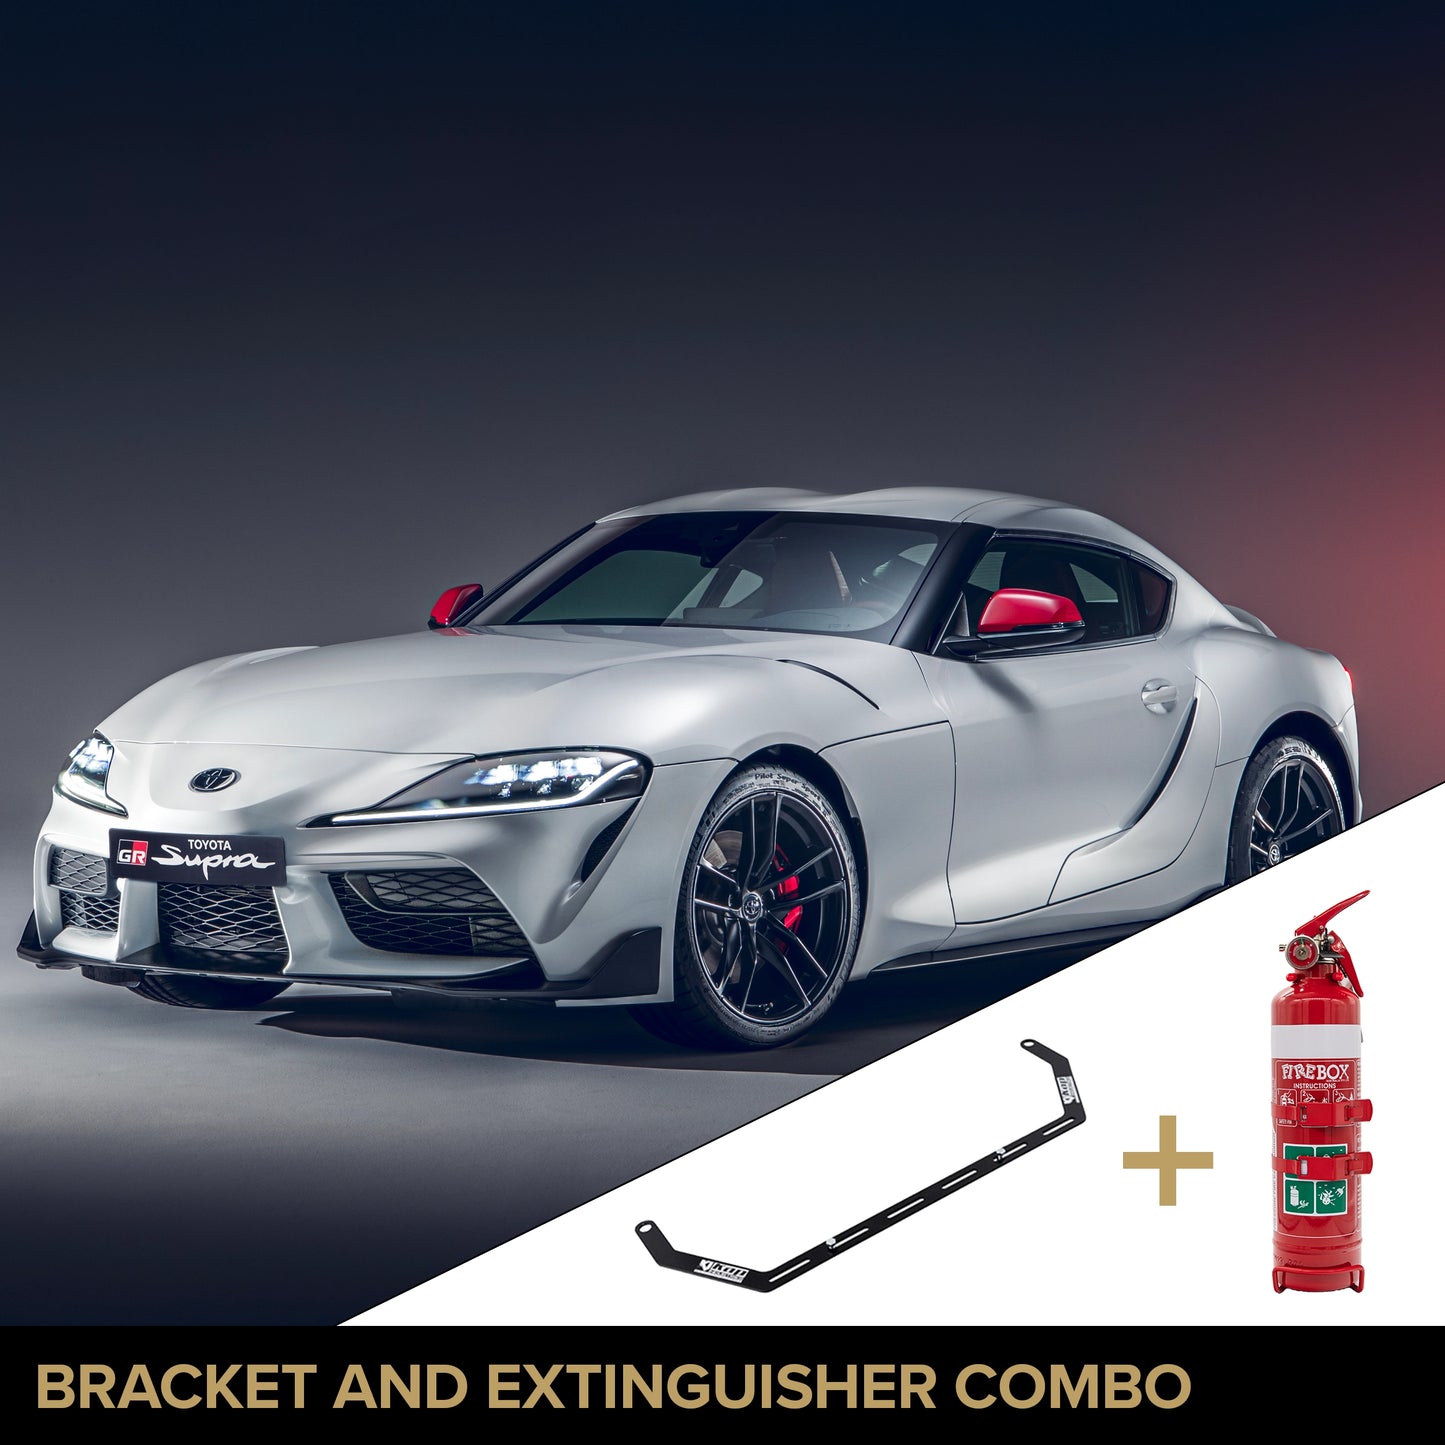 Suits Toyota GR Supra GT/GTS -A90 Fire Extinguisher Bracket